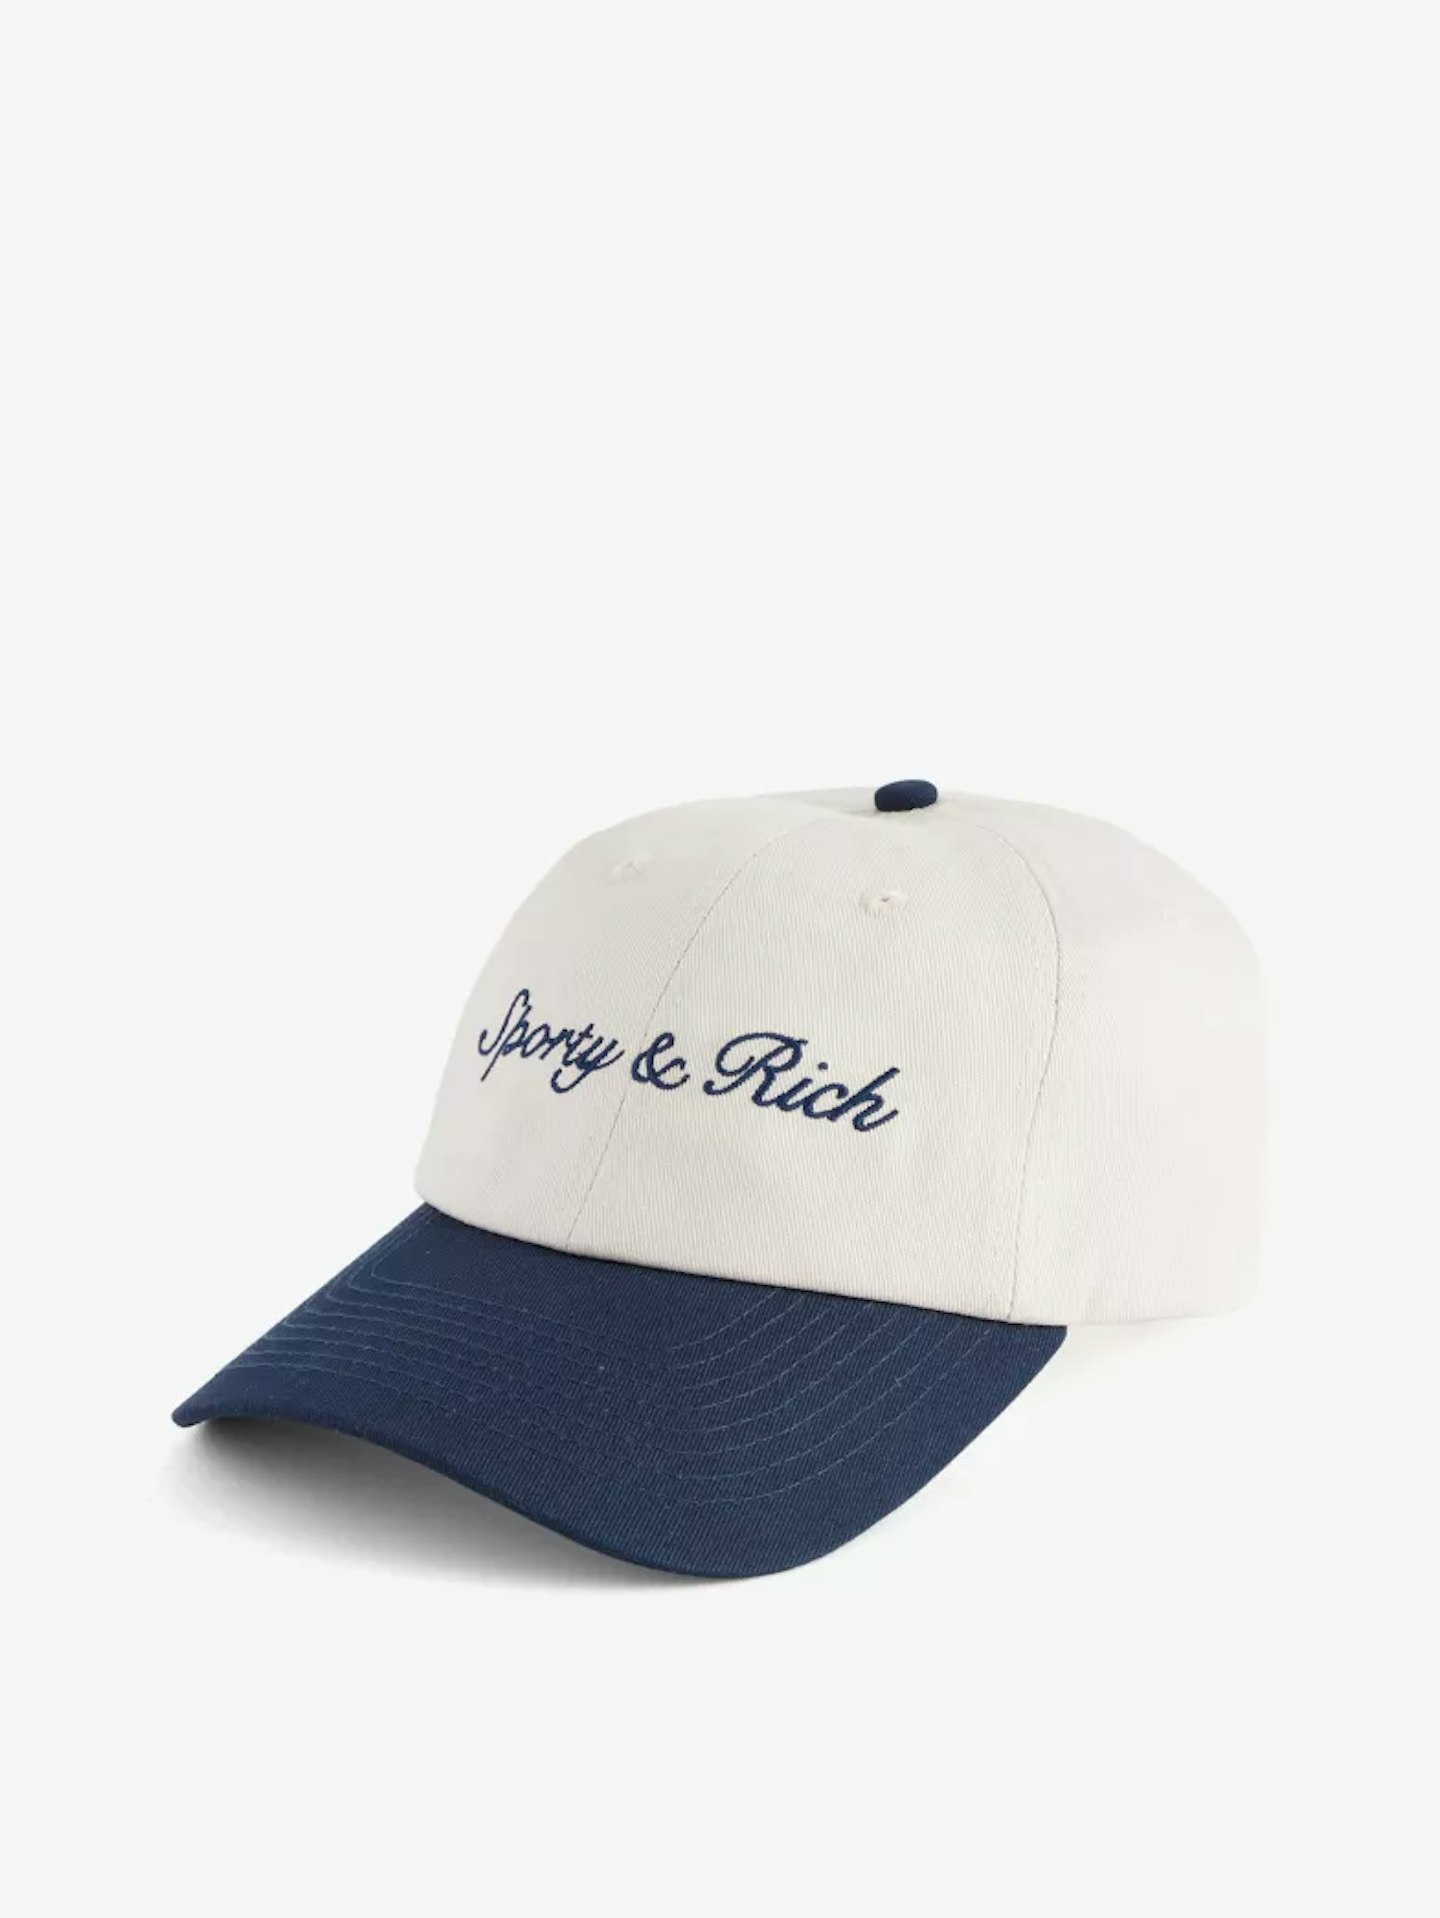 sporty and rich cap 